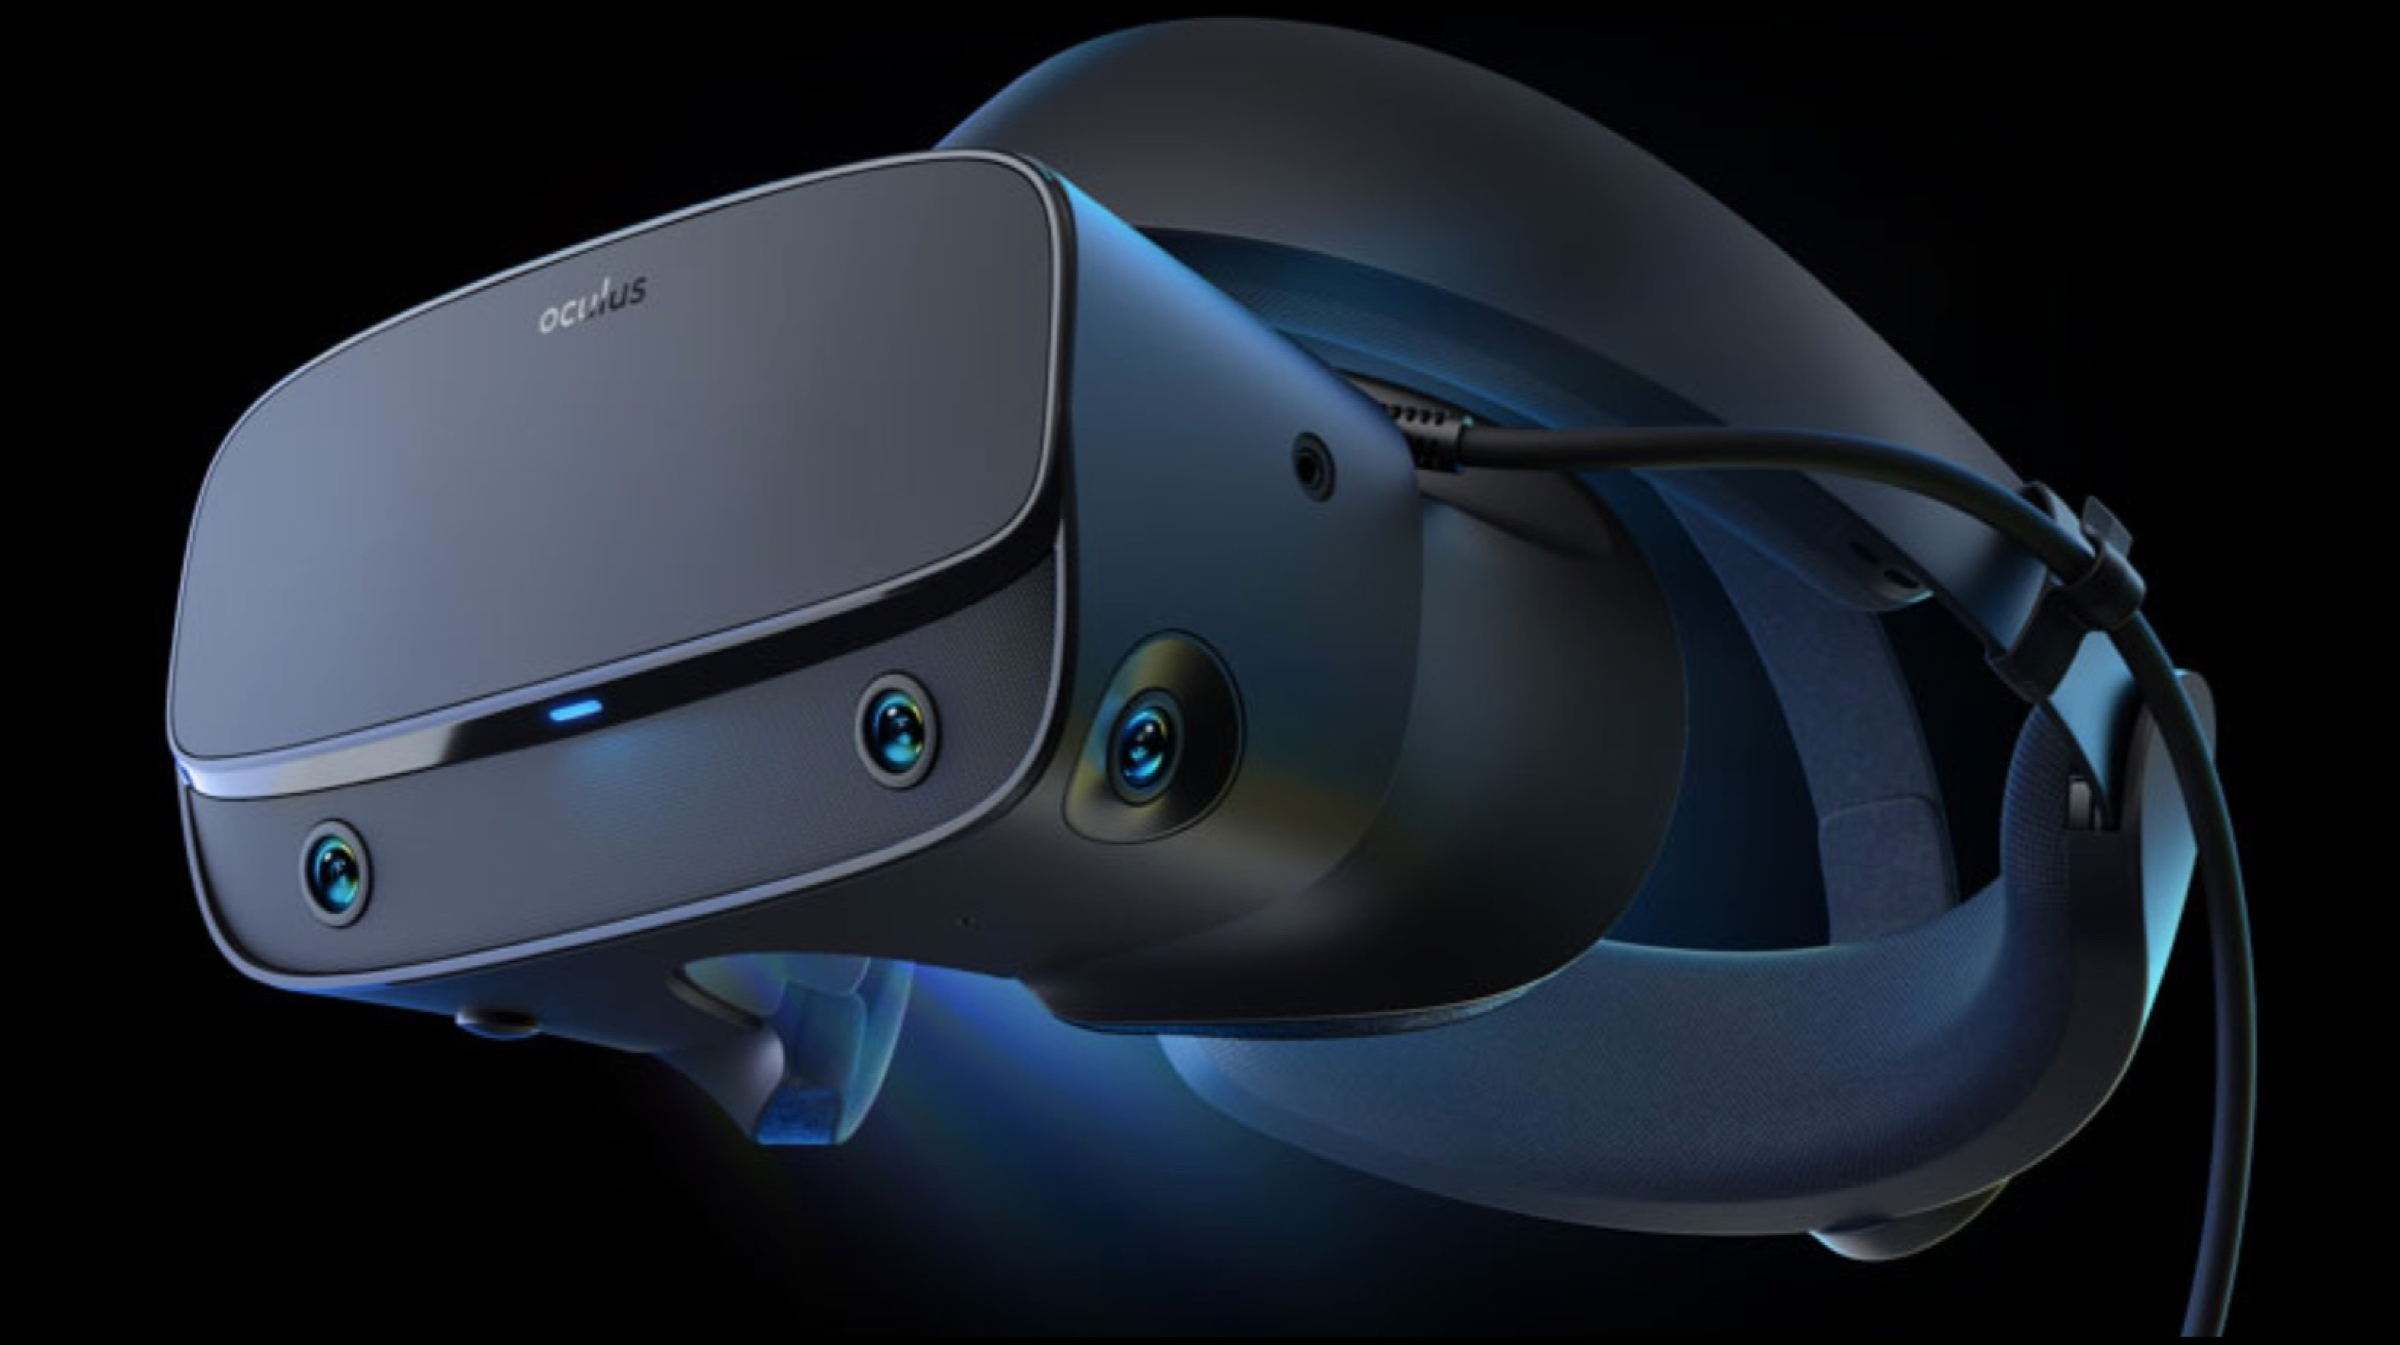 oculus-unveils-rift-s-vr-headset-at-gdc-2019-details-igyaan-network